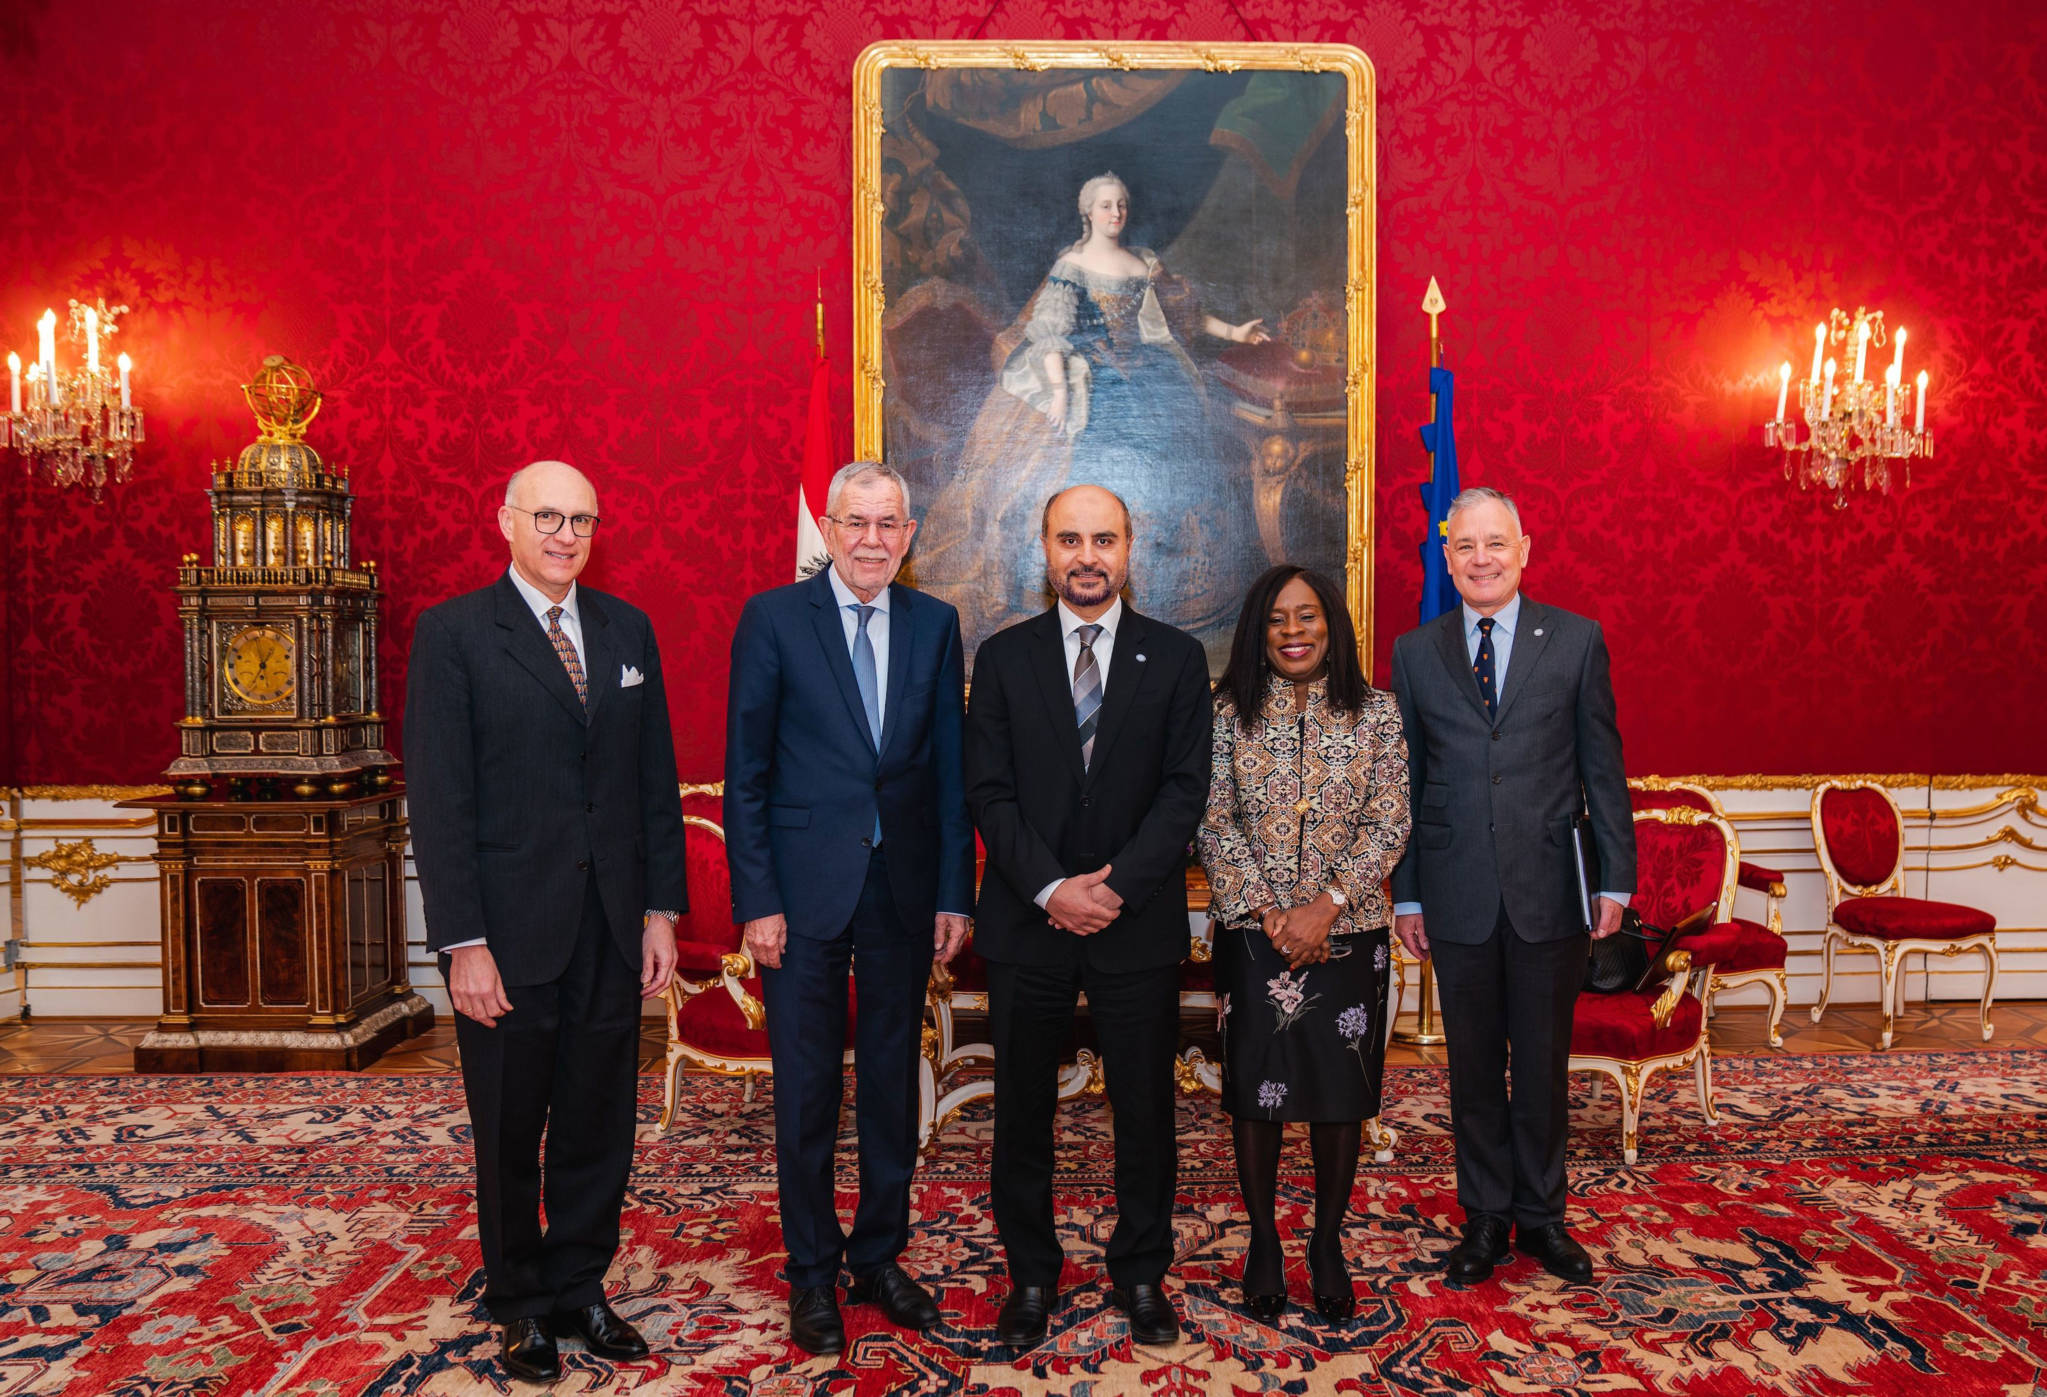 The OPEC Fund delegation with the Austrian President at the Hofburg Palace in Vienna.